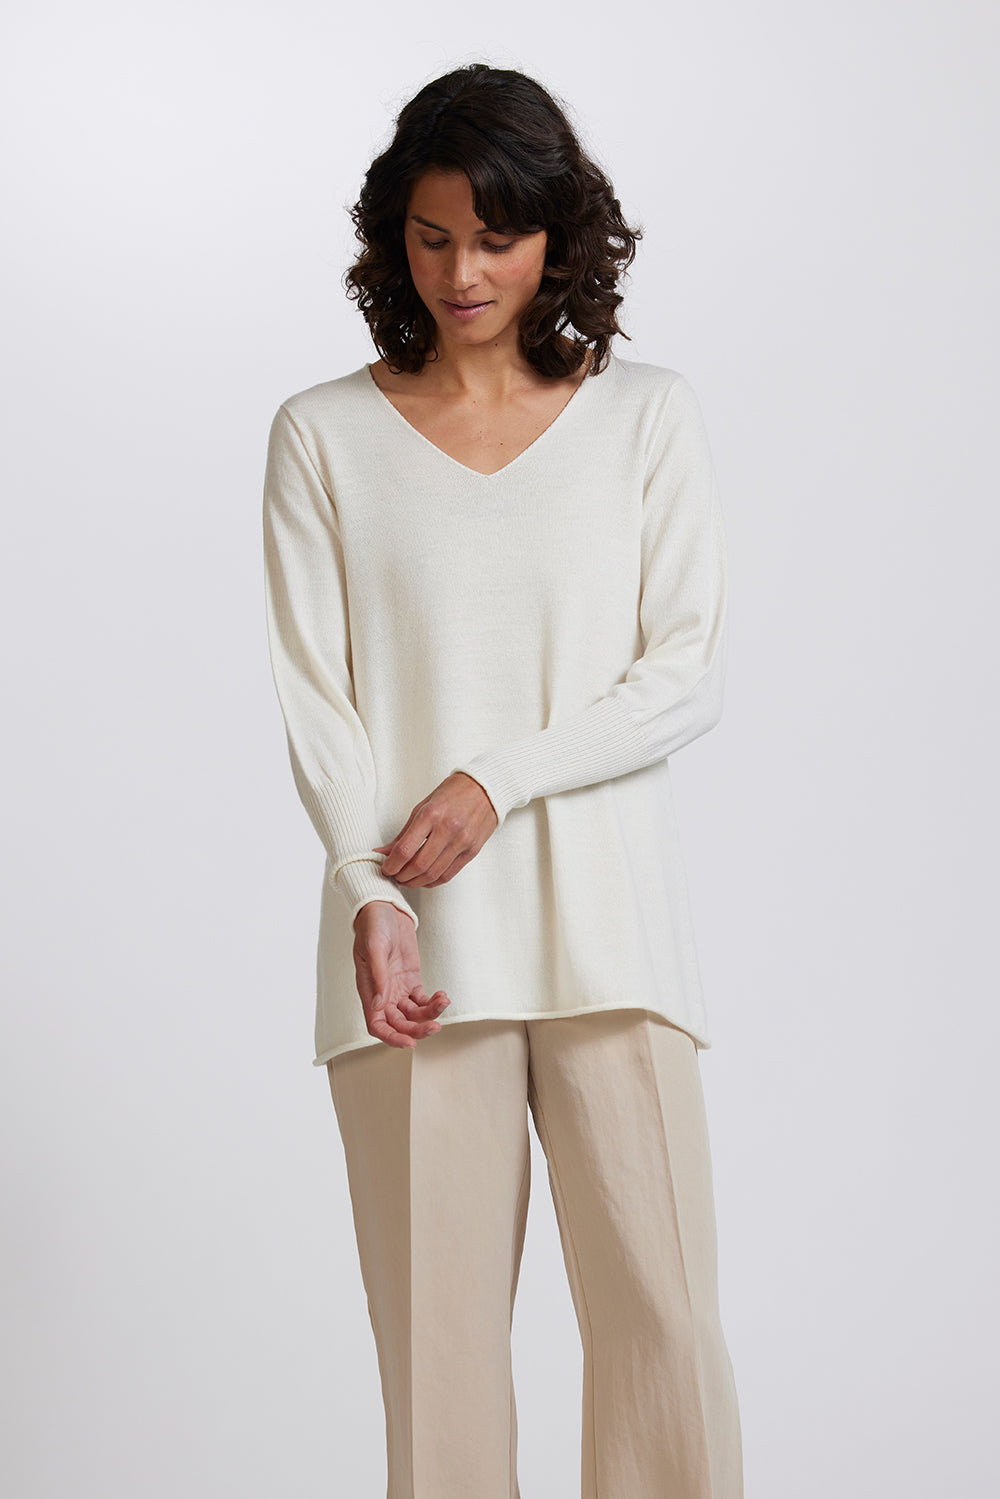 A-Line V Neck Sweater in Natural by Royal Merino